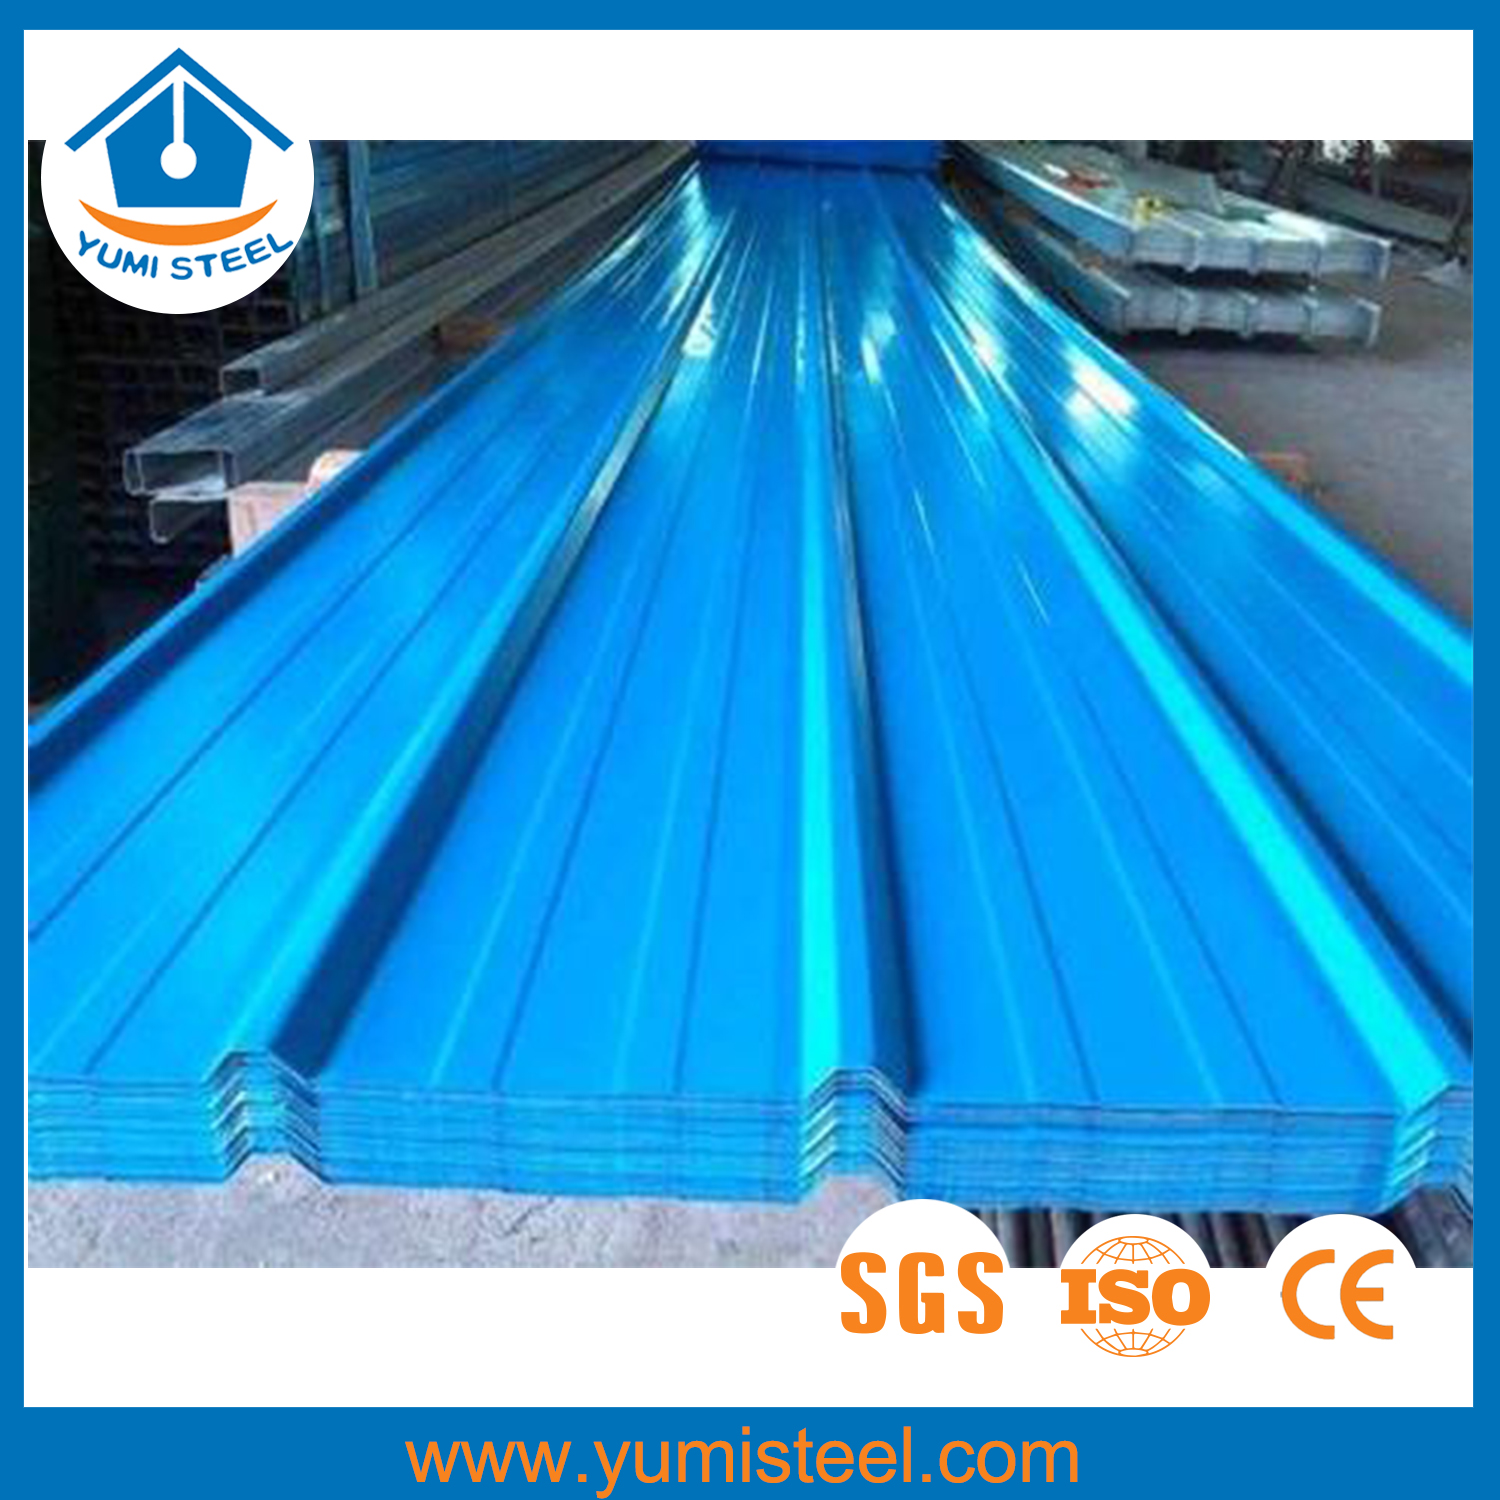 Selection of steel grades and coatings for color coated sheets for construction